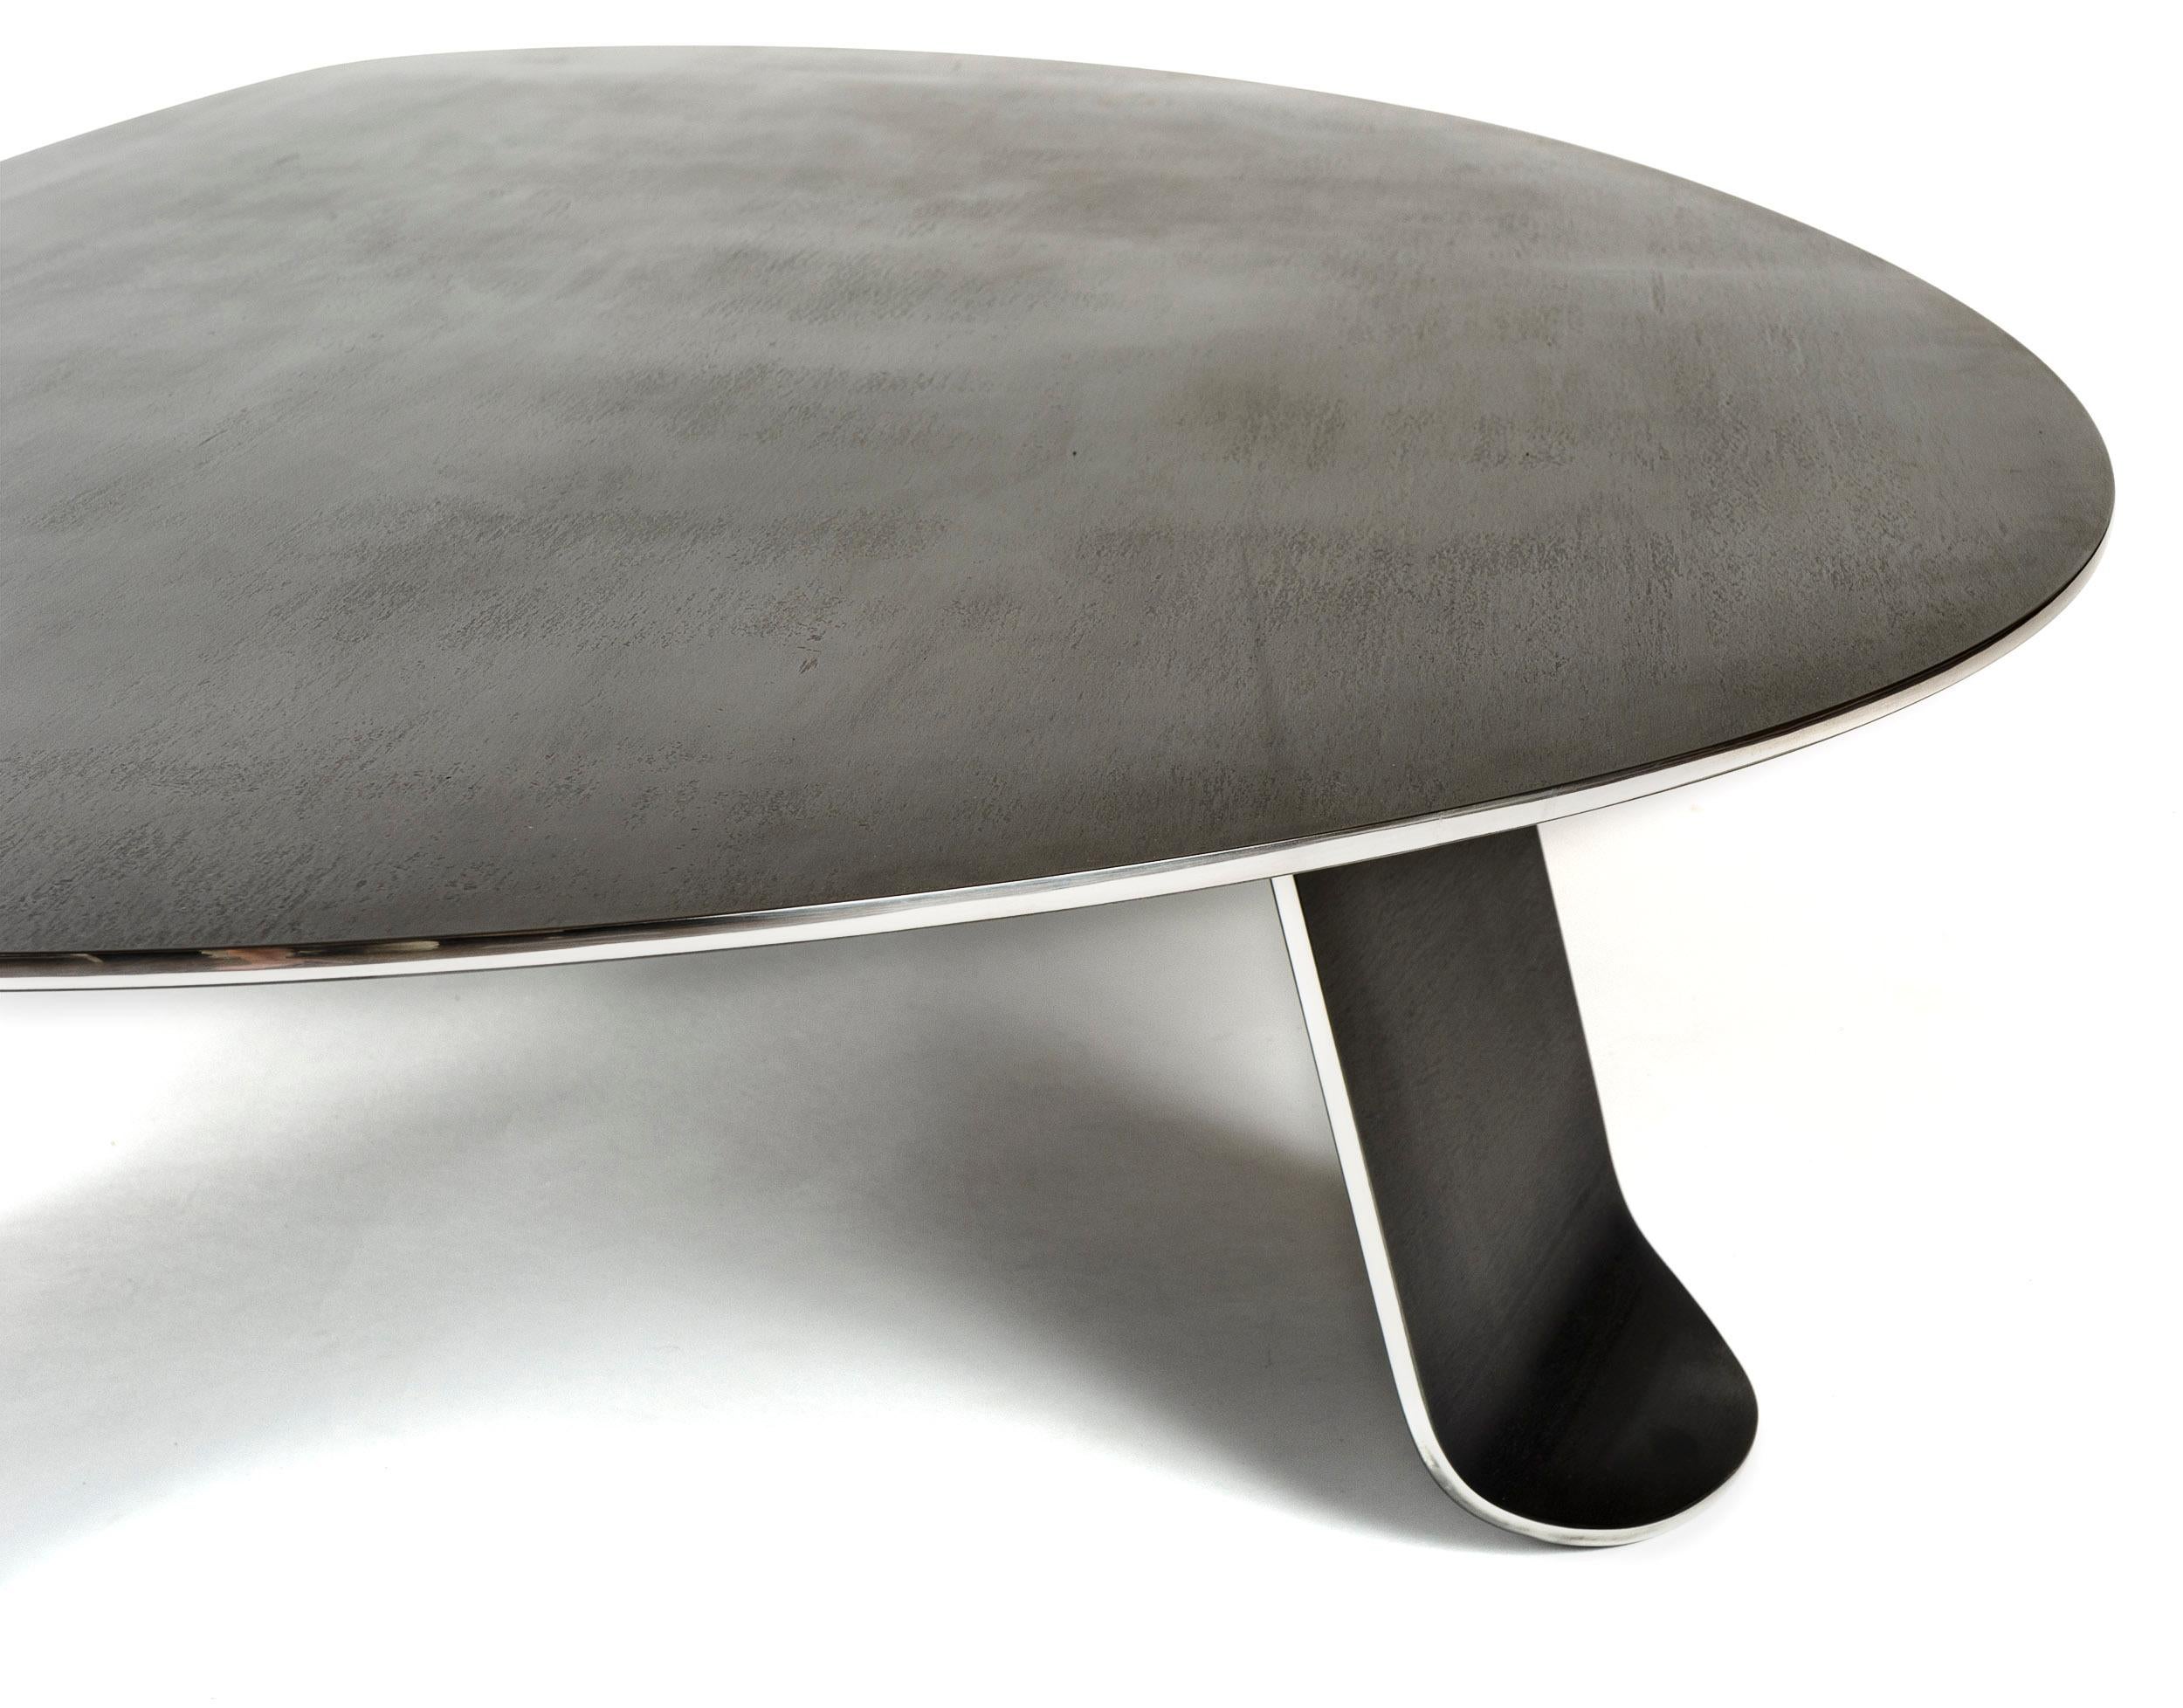 Wyeth Chrysalis Table No. 1 in Blackened Stainless Steel with Polished Edges For Sale 6